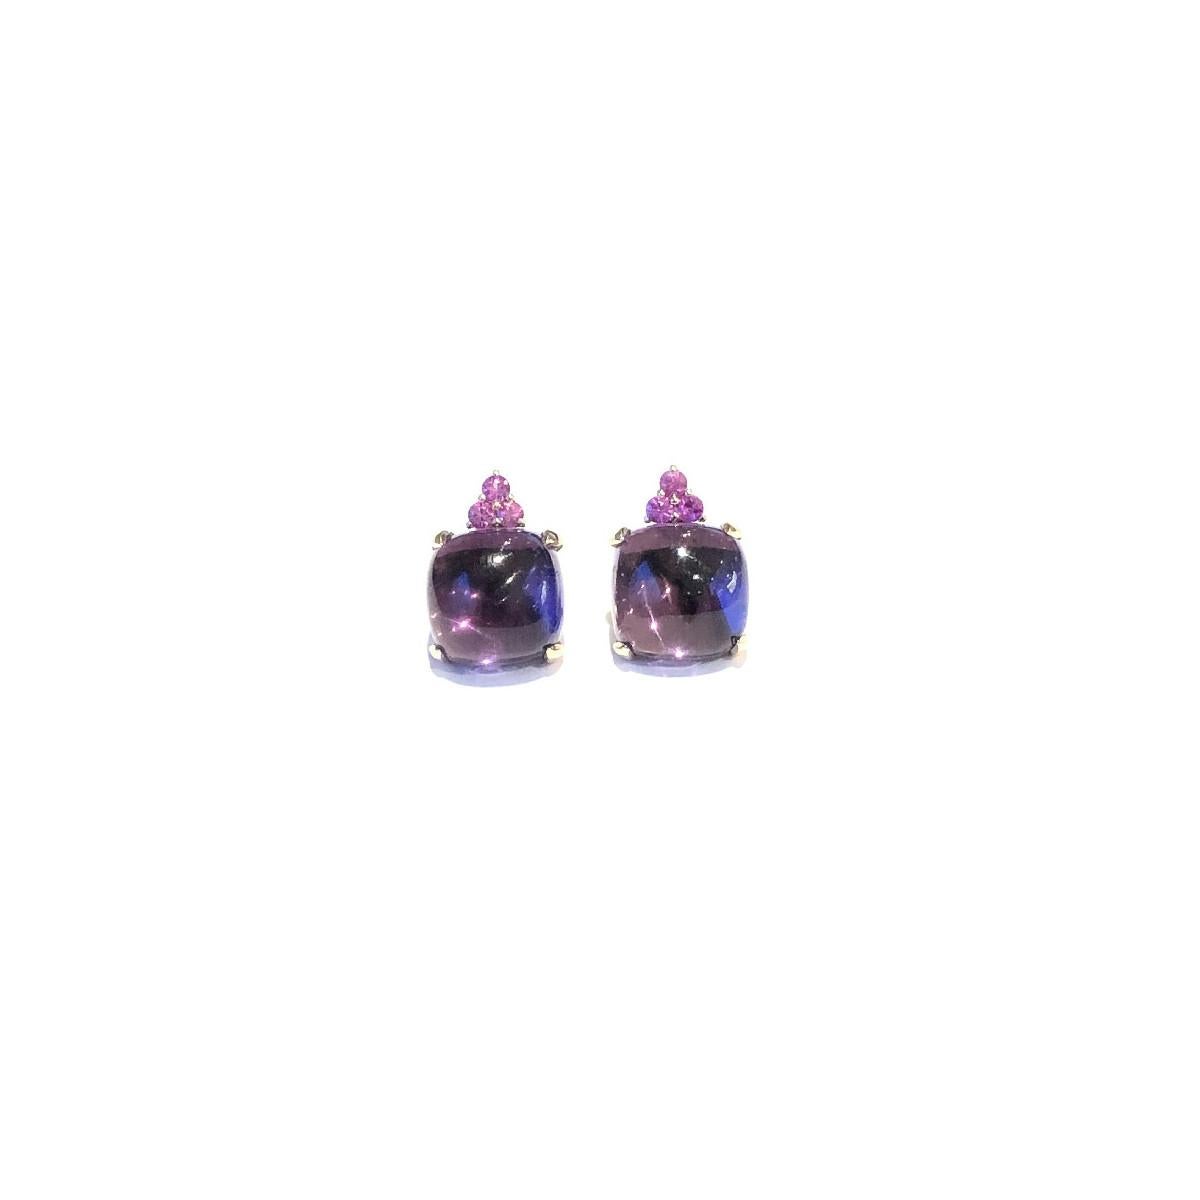 Contemporary Delightful 18K Rose Gold Earrings with Amethysts For Sale